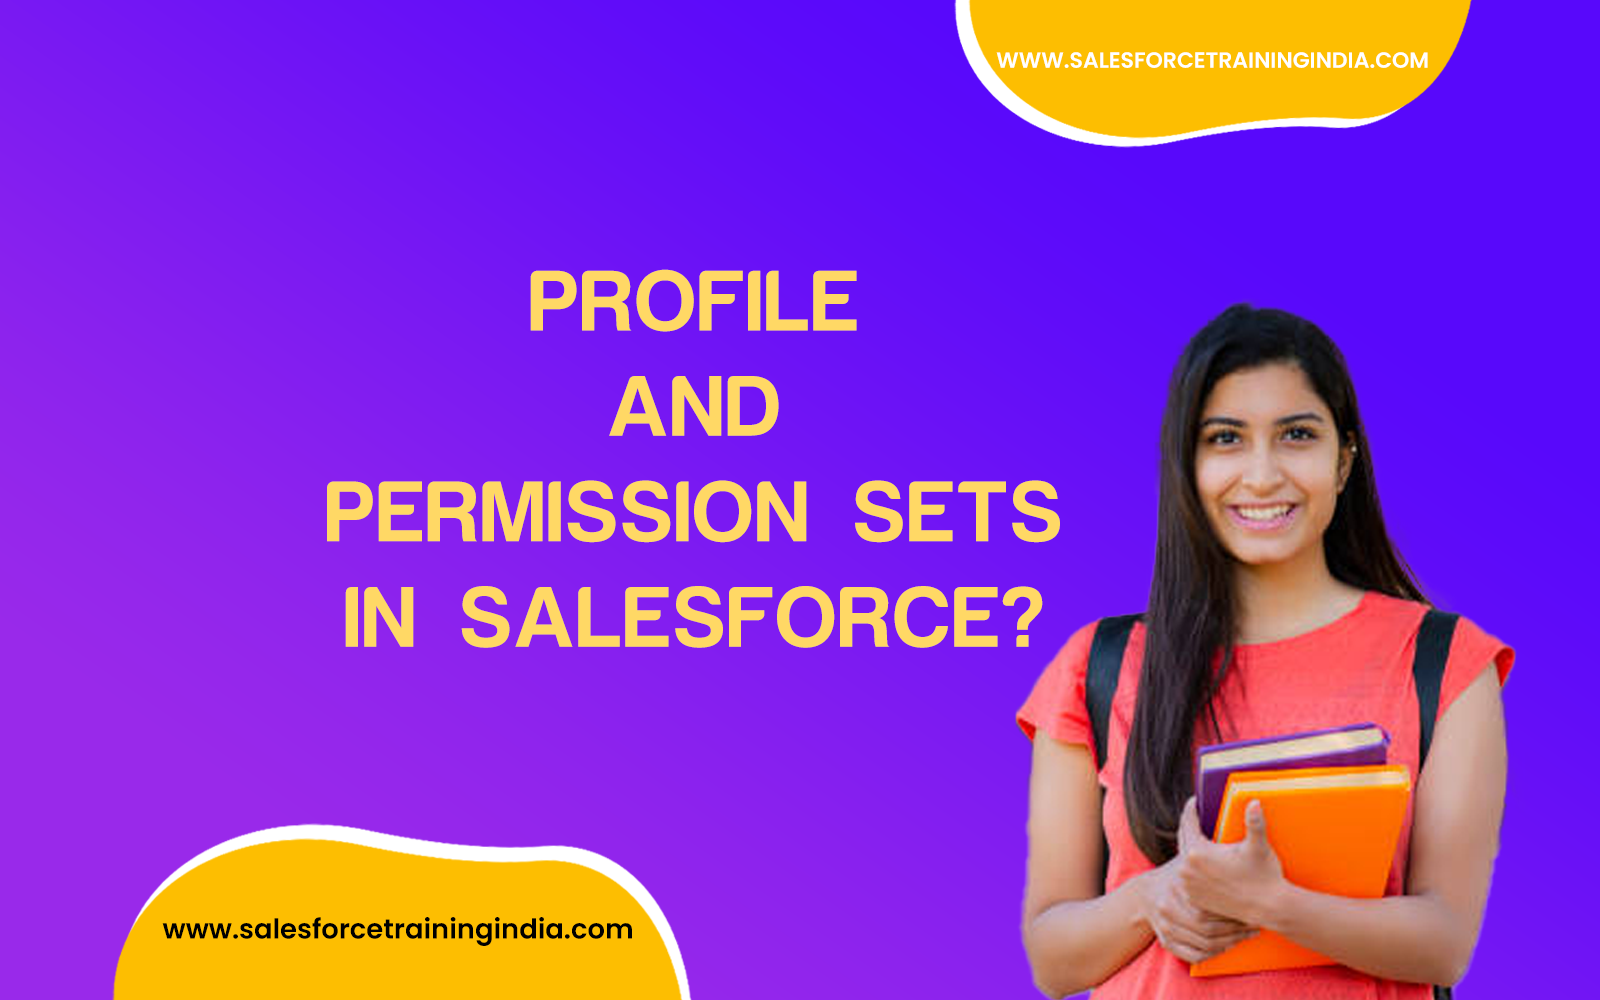 What is the difference between profile and permission sets in Salesforce?